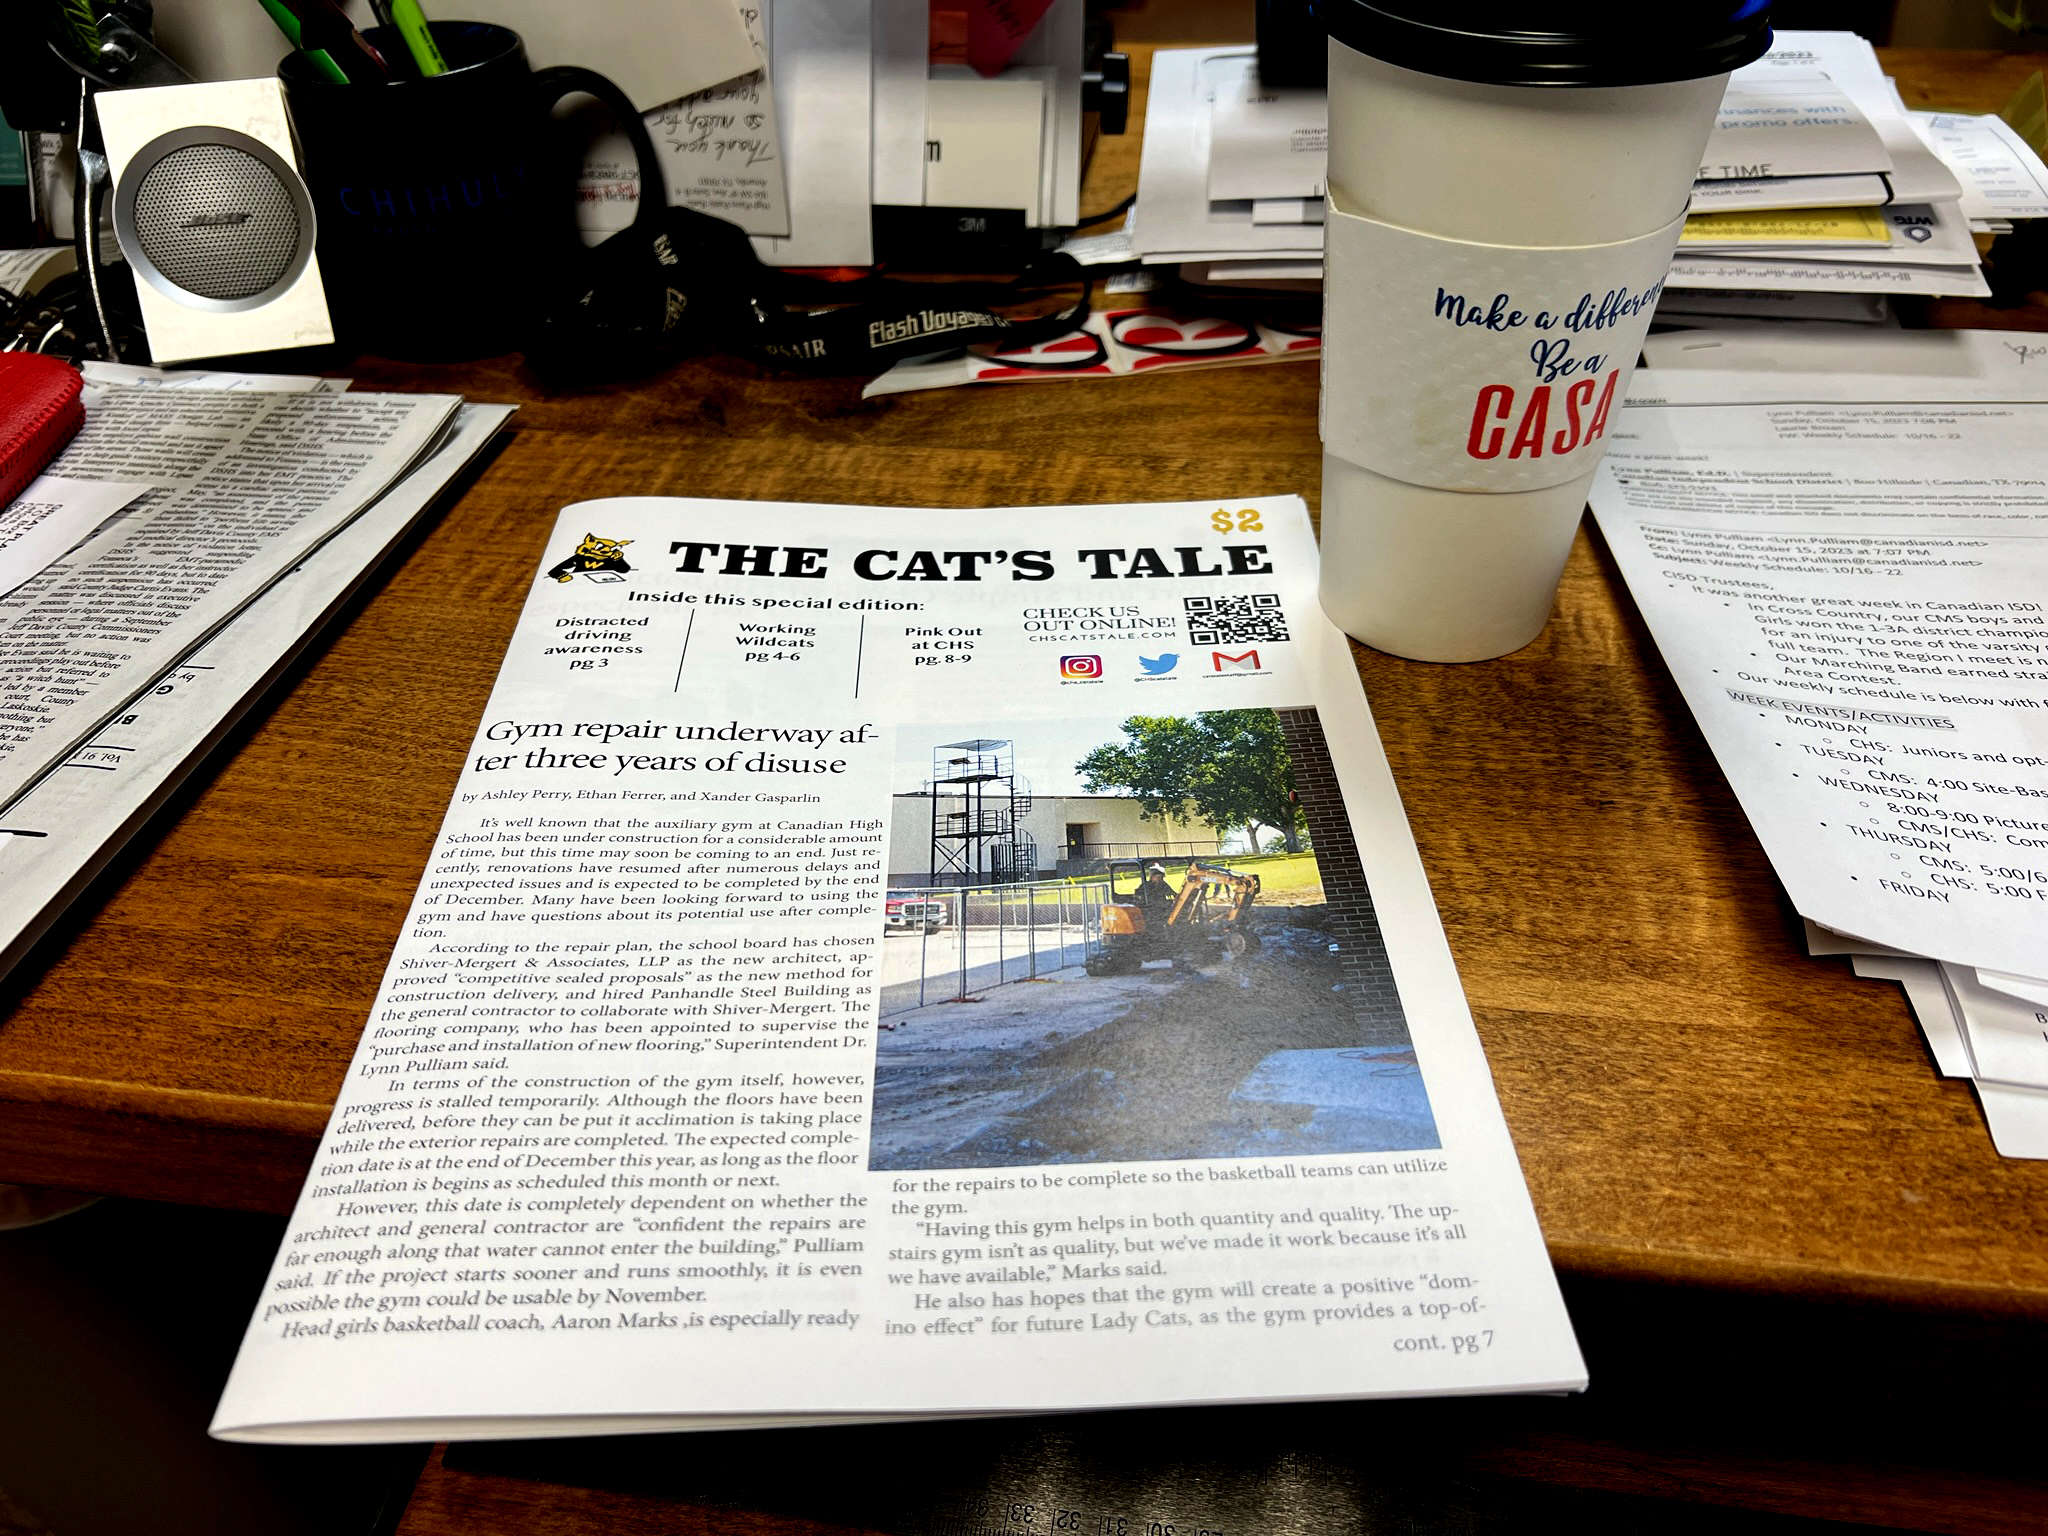 Our well-read edition of The Cat's Tale, with coffee